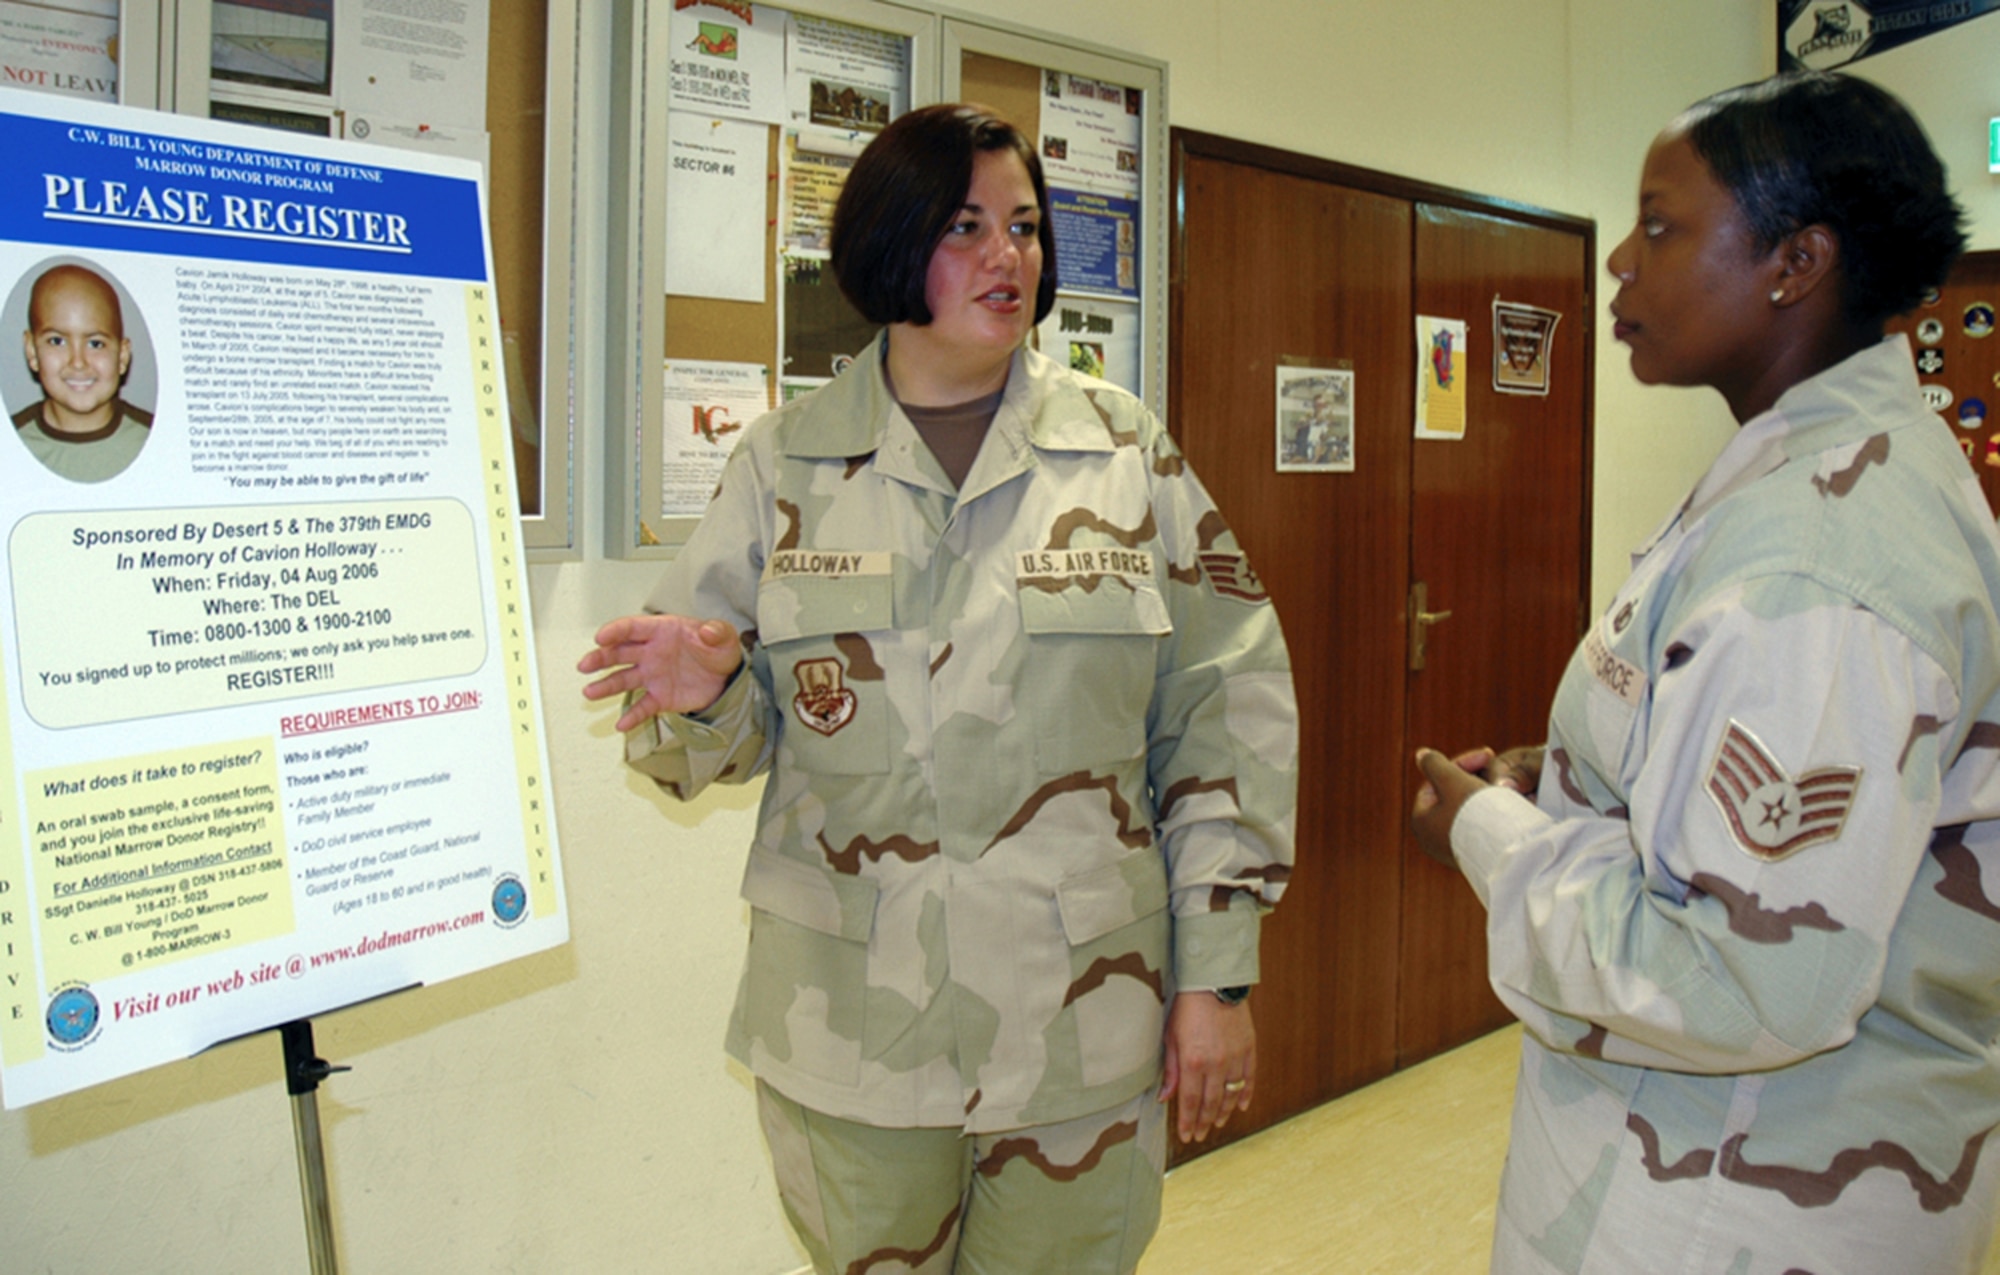 Staff Sgt. Danielle Holloway talks to Staff Sgt. Yolanda Hands about the bone marrow registration drive she organized at a forward operating base in Southwest Asia. Sergeant Holloway organized the drive in memory of her son, Cavion, who lost his battle with acute lymphoblastic leukemia last September. The drive drew 685 new registrants to the national donor registry. Sergeants Holloway and Hands are with the 379th Air Expeditionary Wing. (U.S. Air Force photo/Staff Sgt. Celena Wilson)